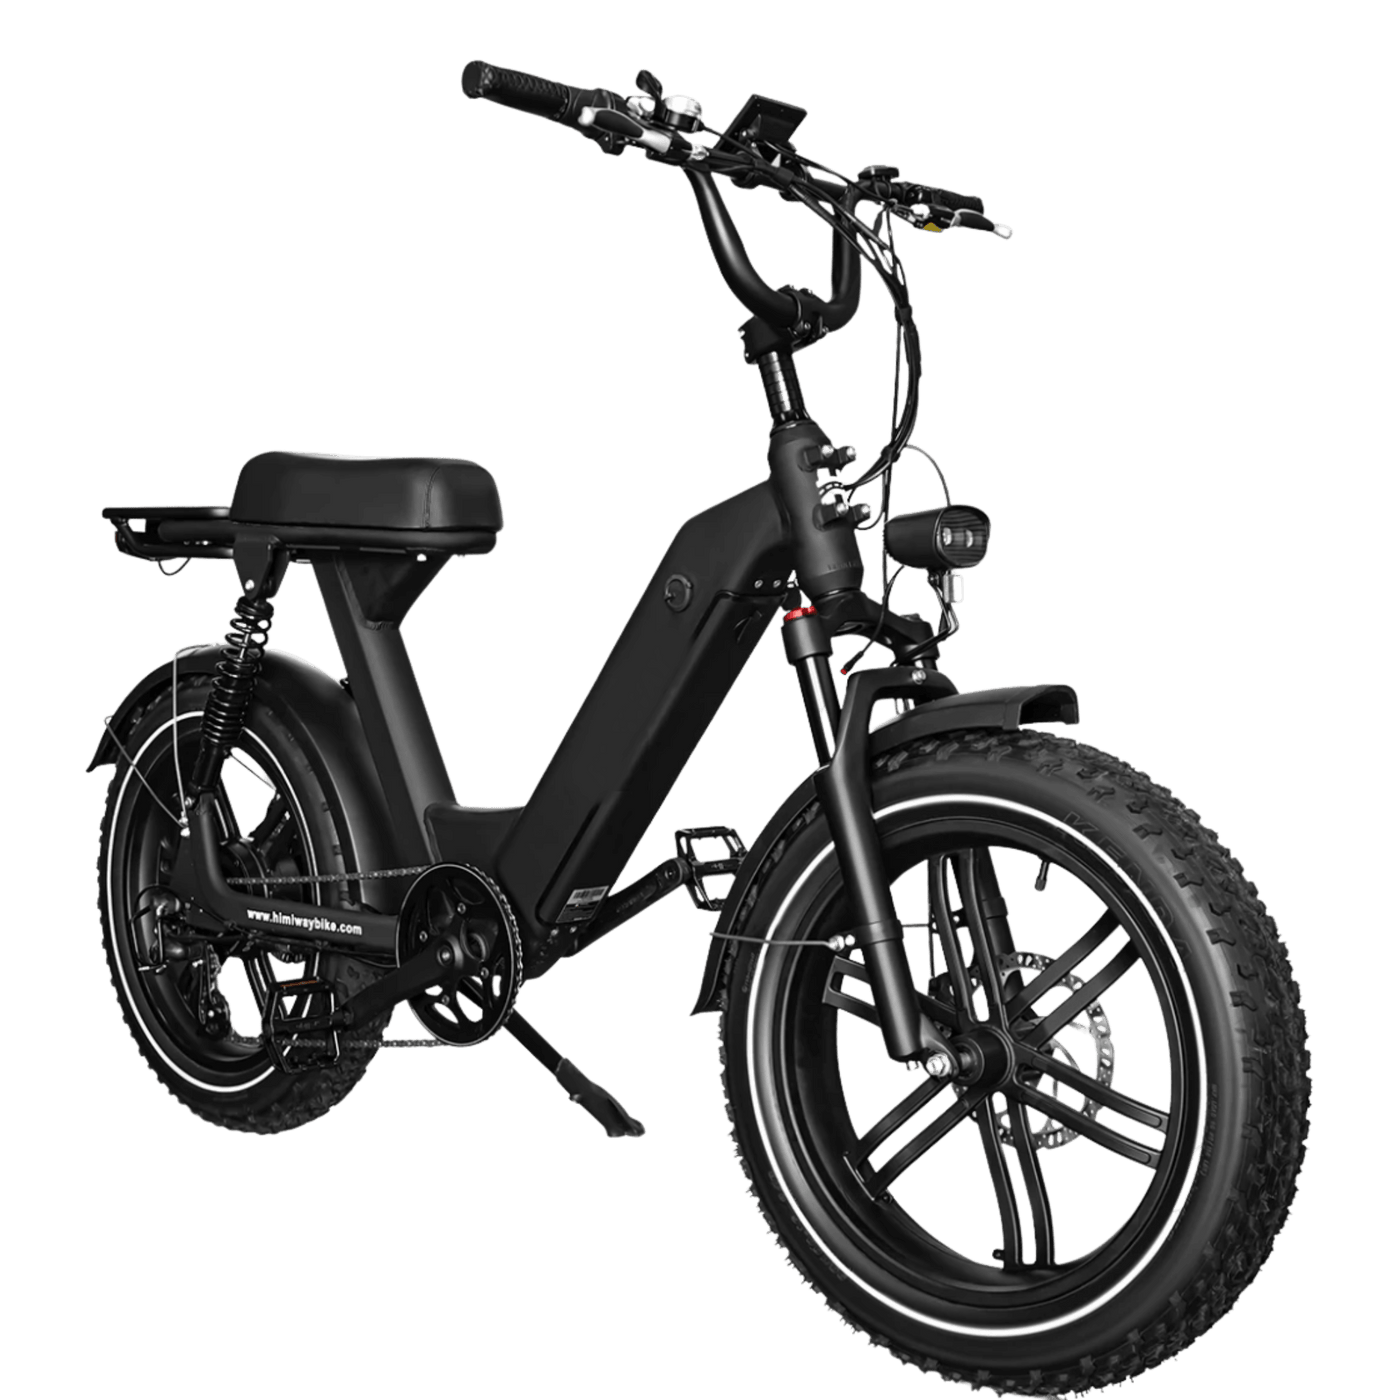 GlareWheel 750W Fat Tire Moped-Style Electric Bicycle